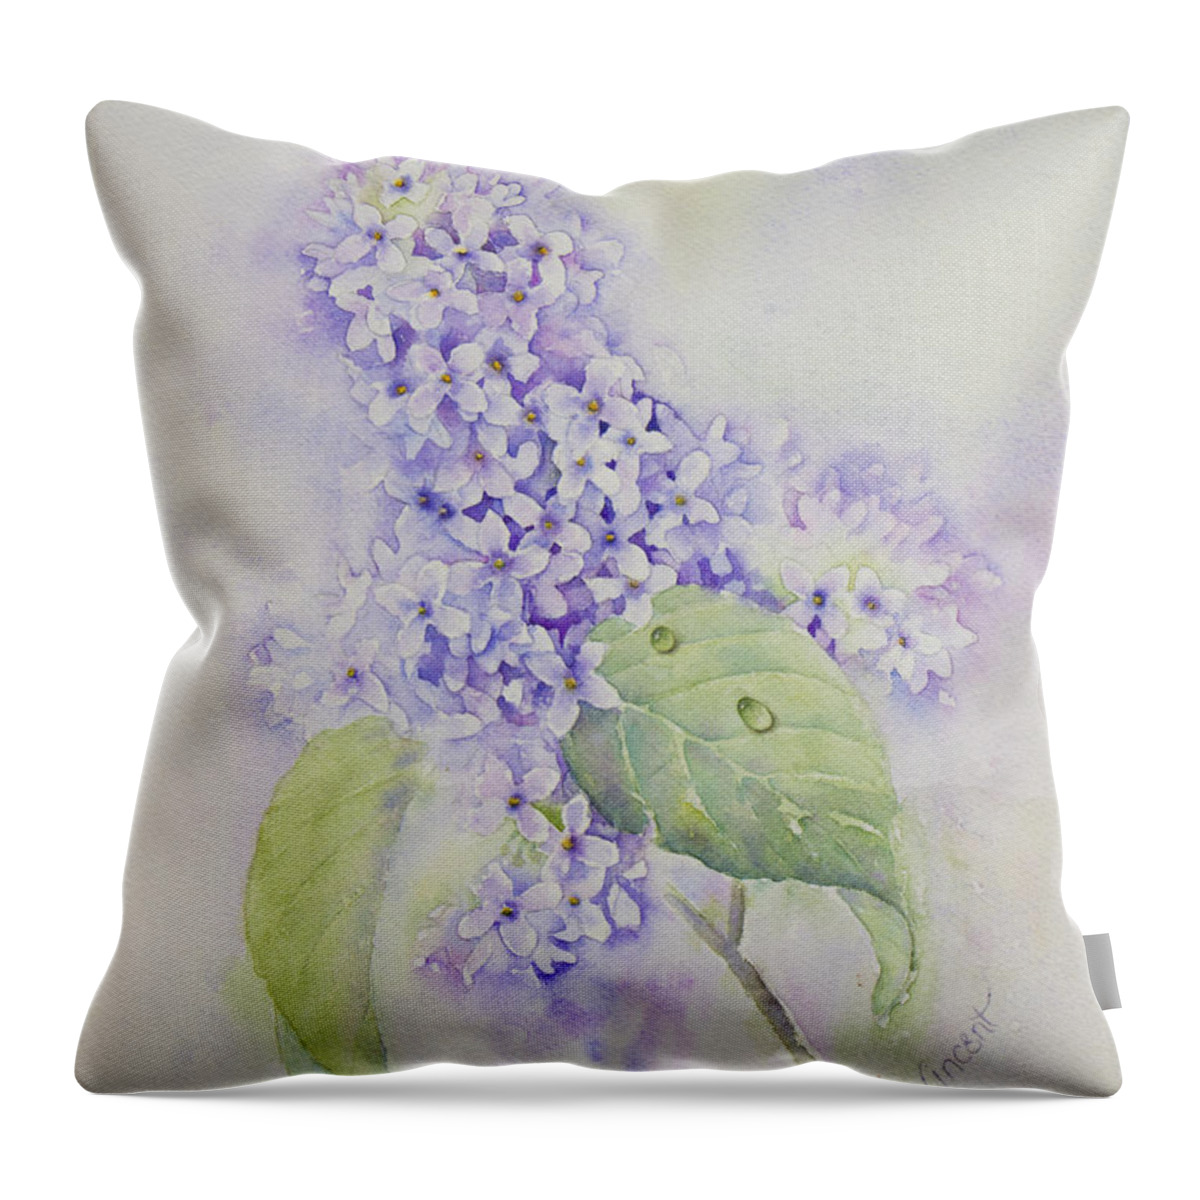 Watercolor Throw Pillow featuring the painting Lilac Study by Lisa Vincent